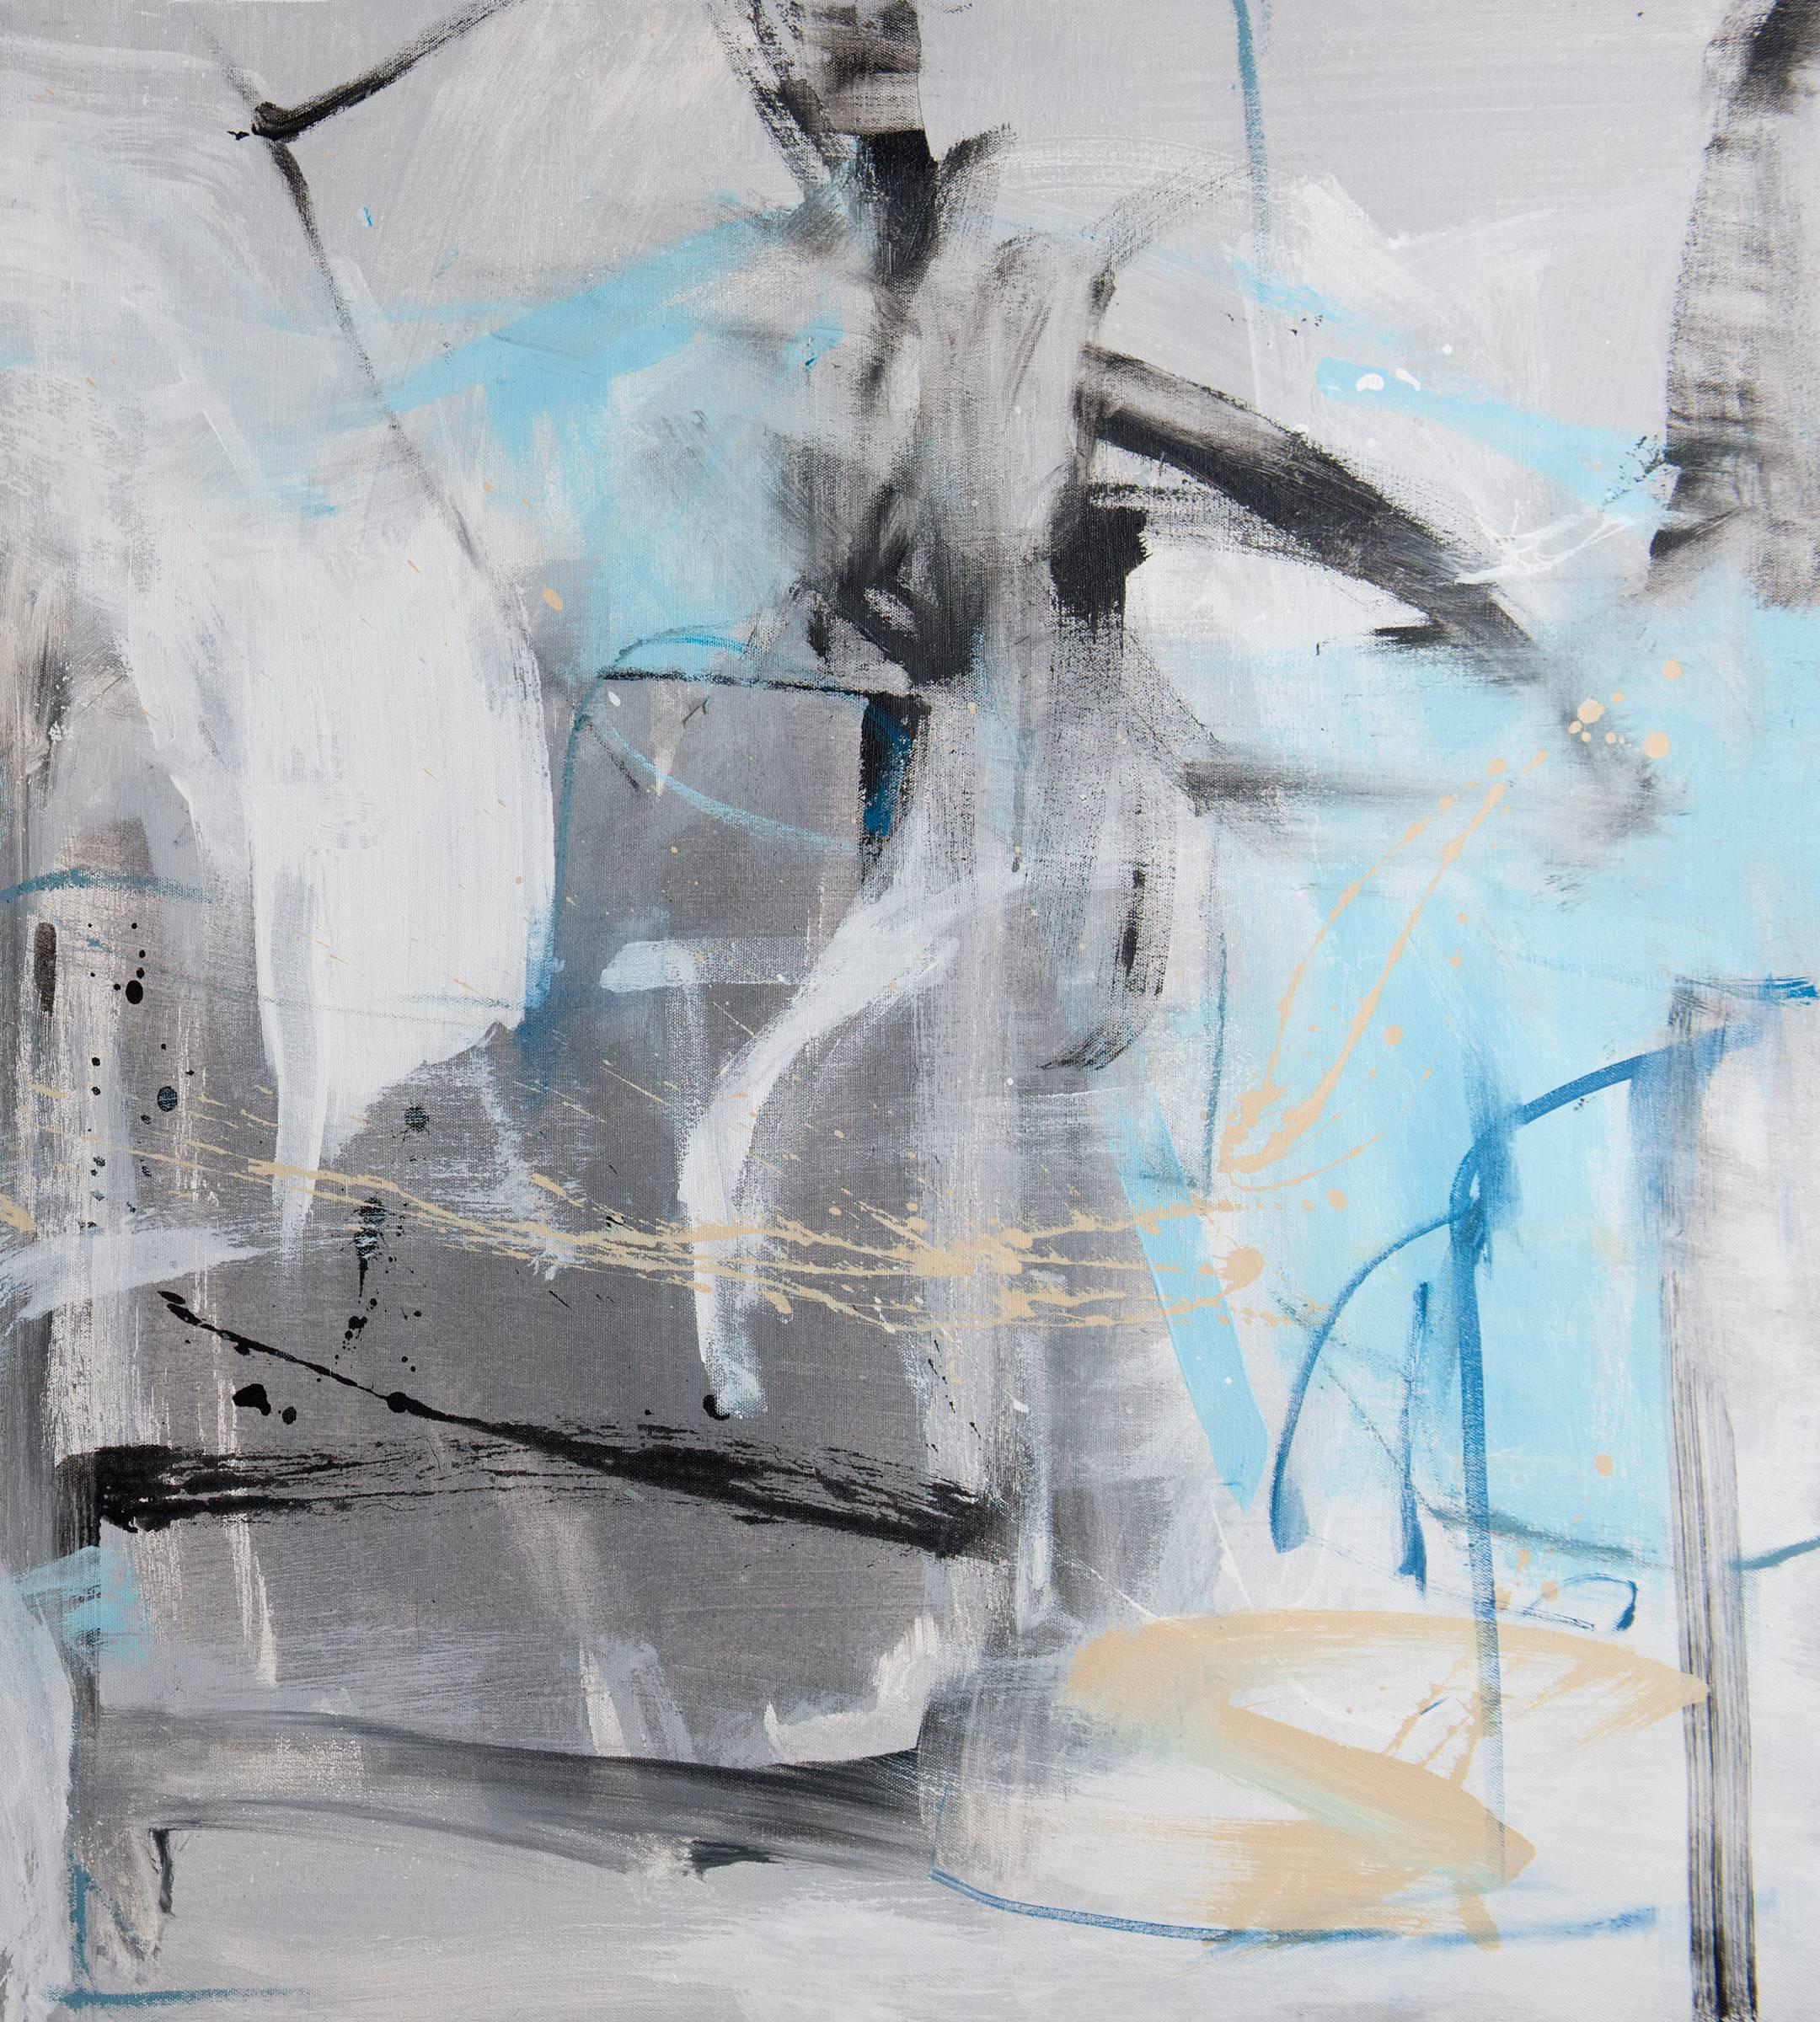 Wind and Waterfall - diptych - Gray Abstract Painting by Emilia Dubicki